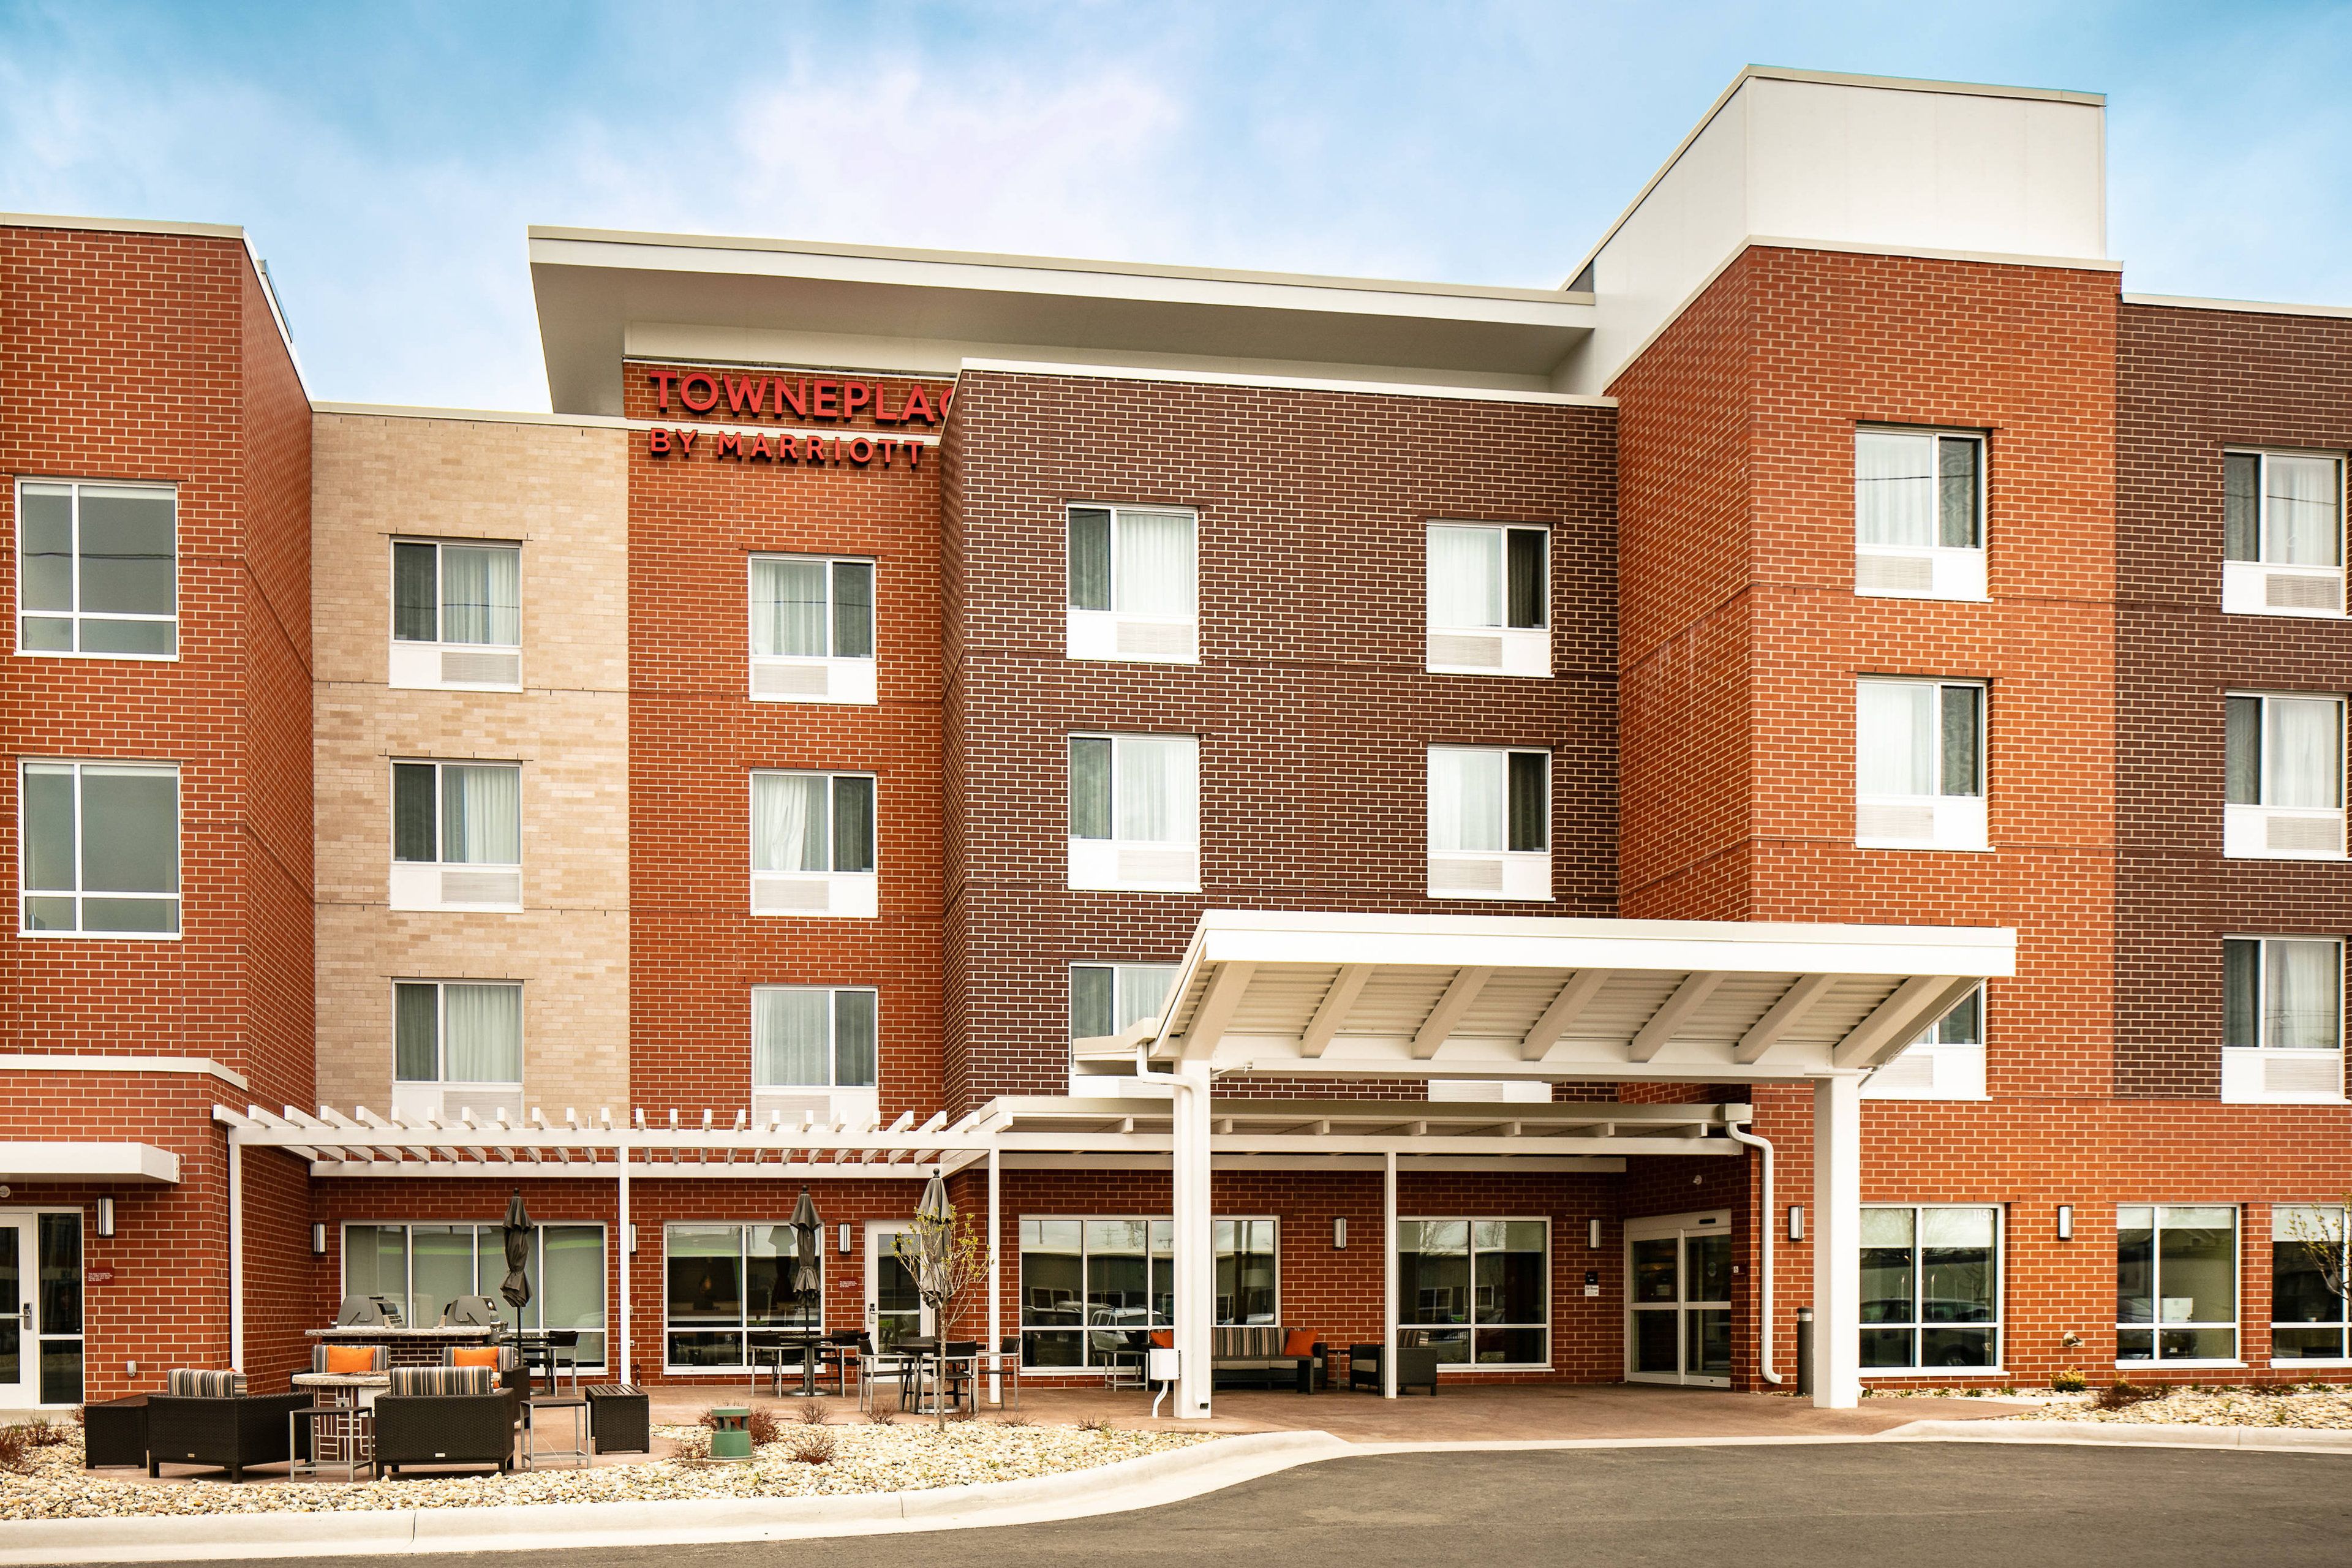 TownePlace Suites by Marriott Dubuque Downtown image 1